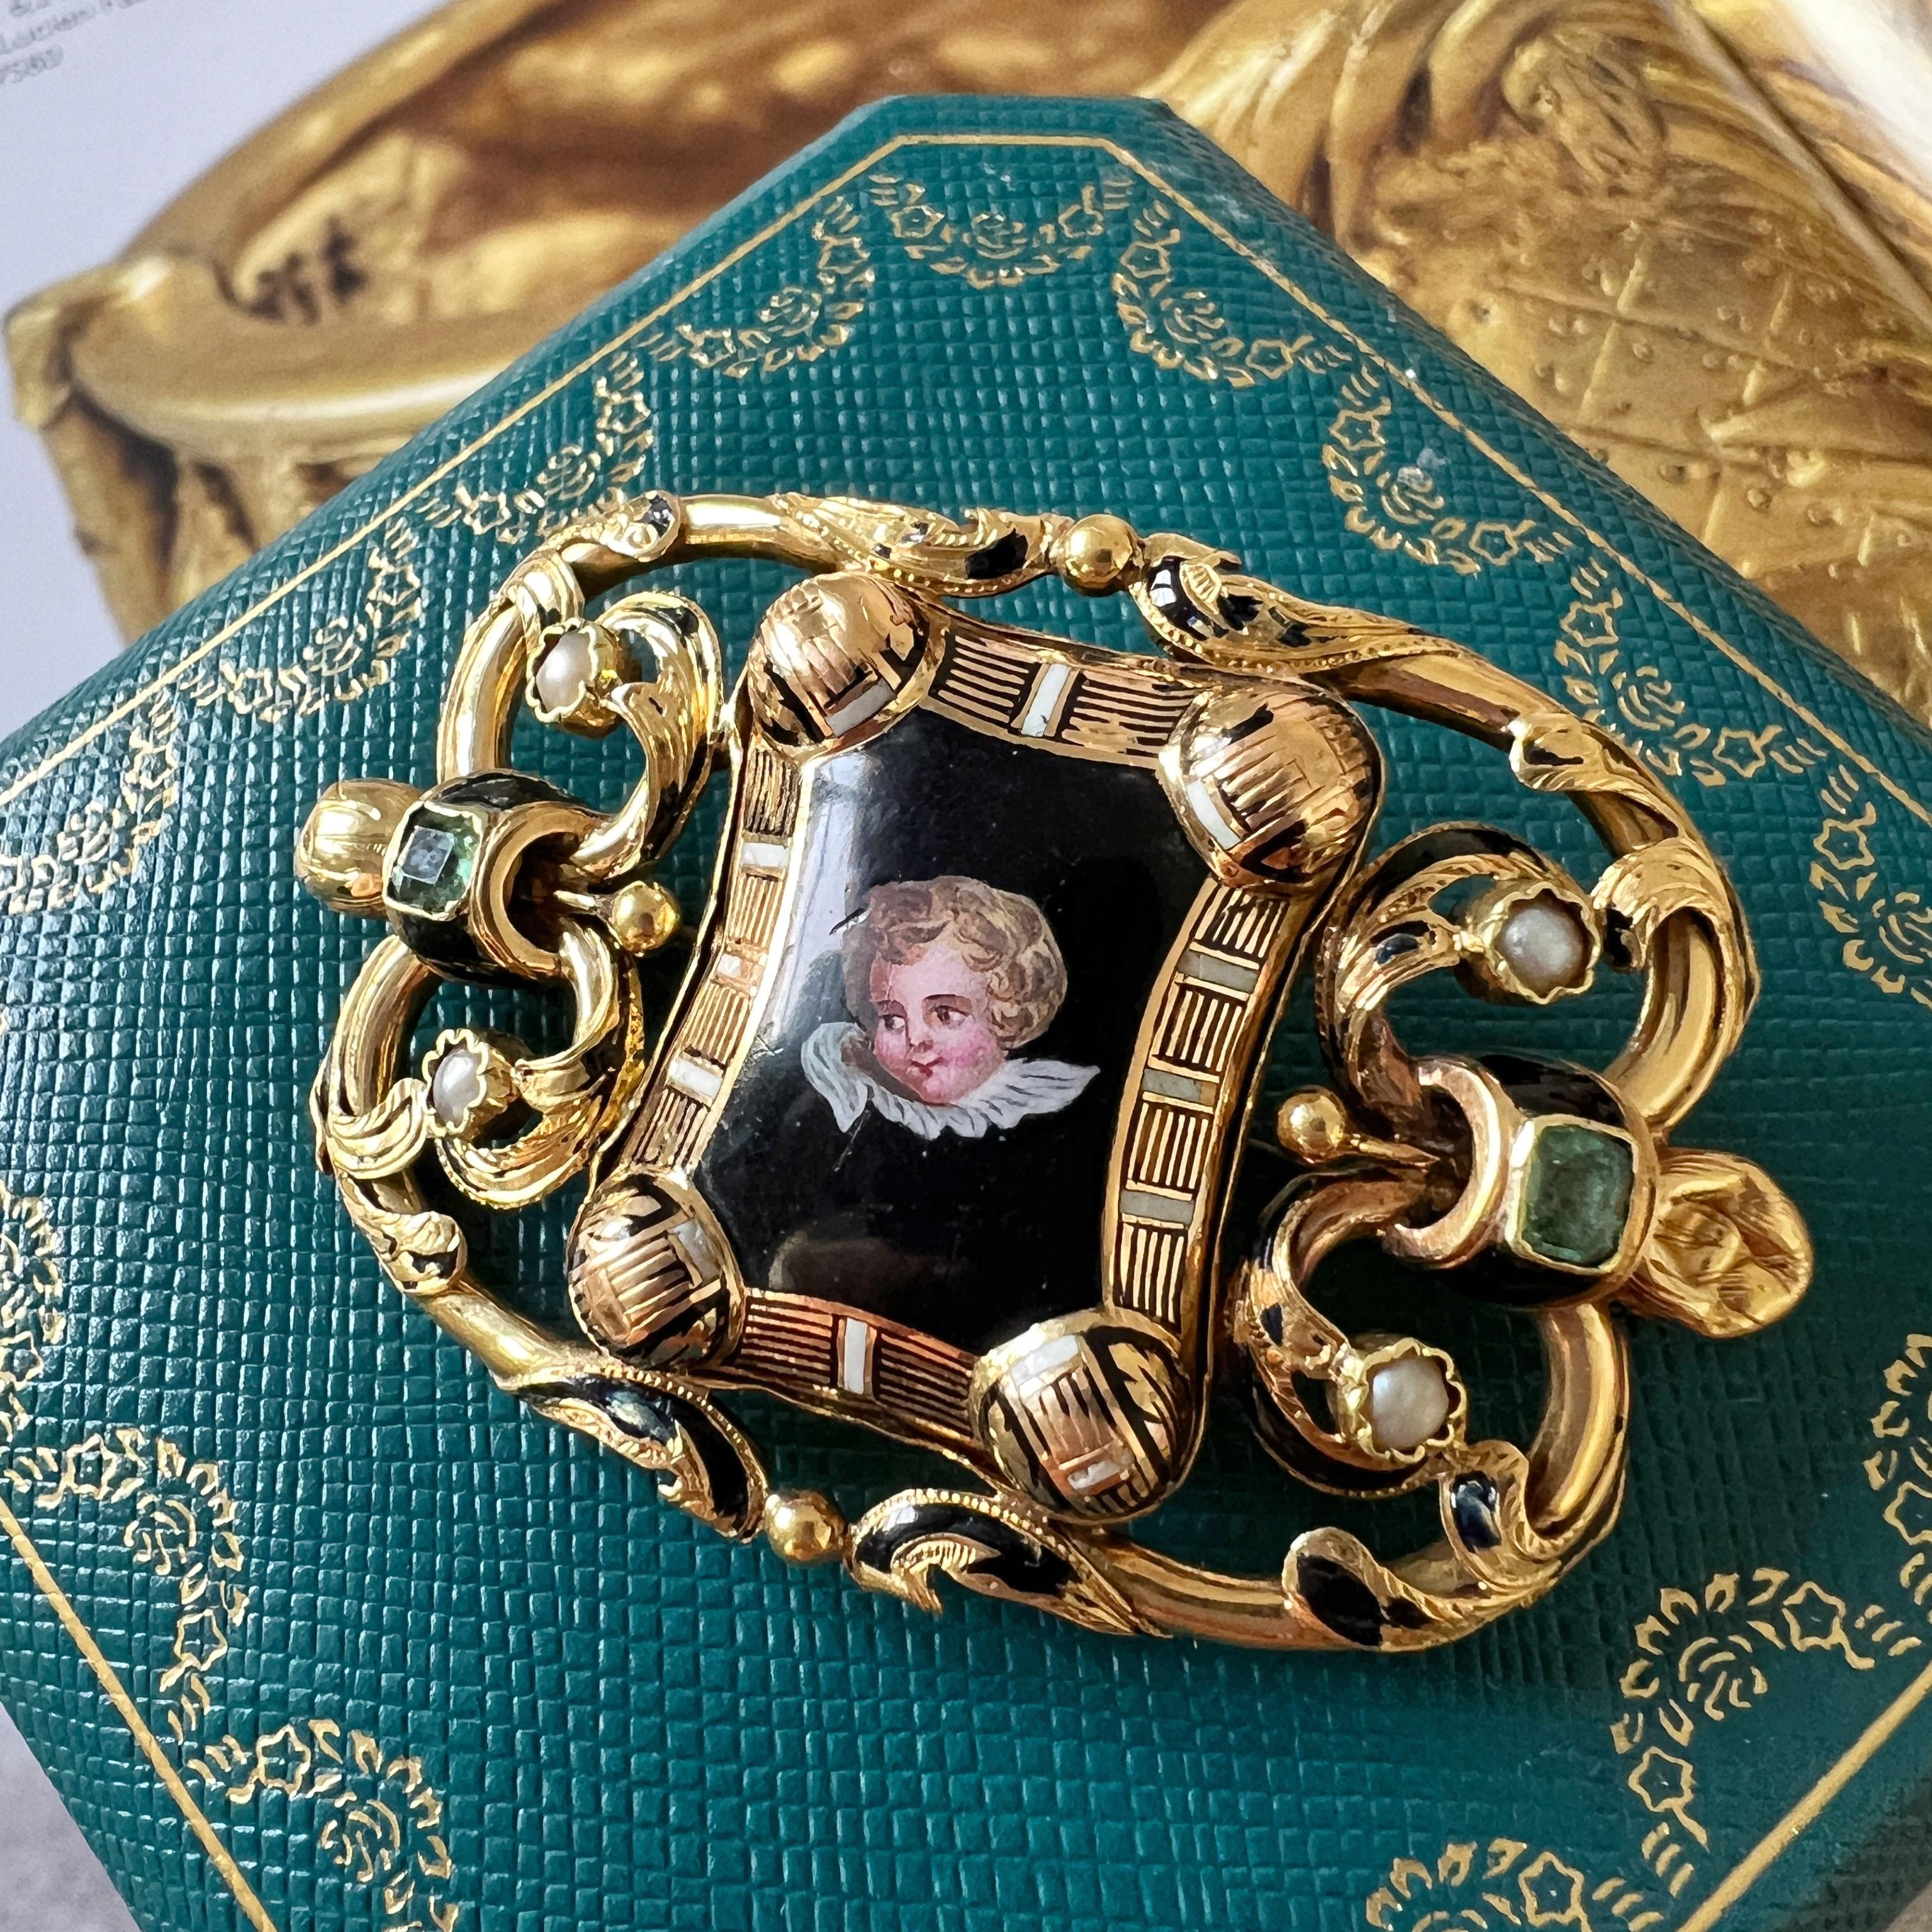 For sale a Victorian era, 18K gold brooch capturing the timeless charm of an enamored cherub, delicately hand-painted with intricate detail. Nestled amidst a canvas of fine enamel, this cherub conveys an aura of innocence and playfulness, with rosy